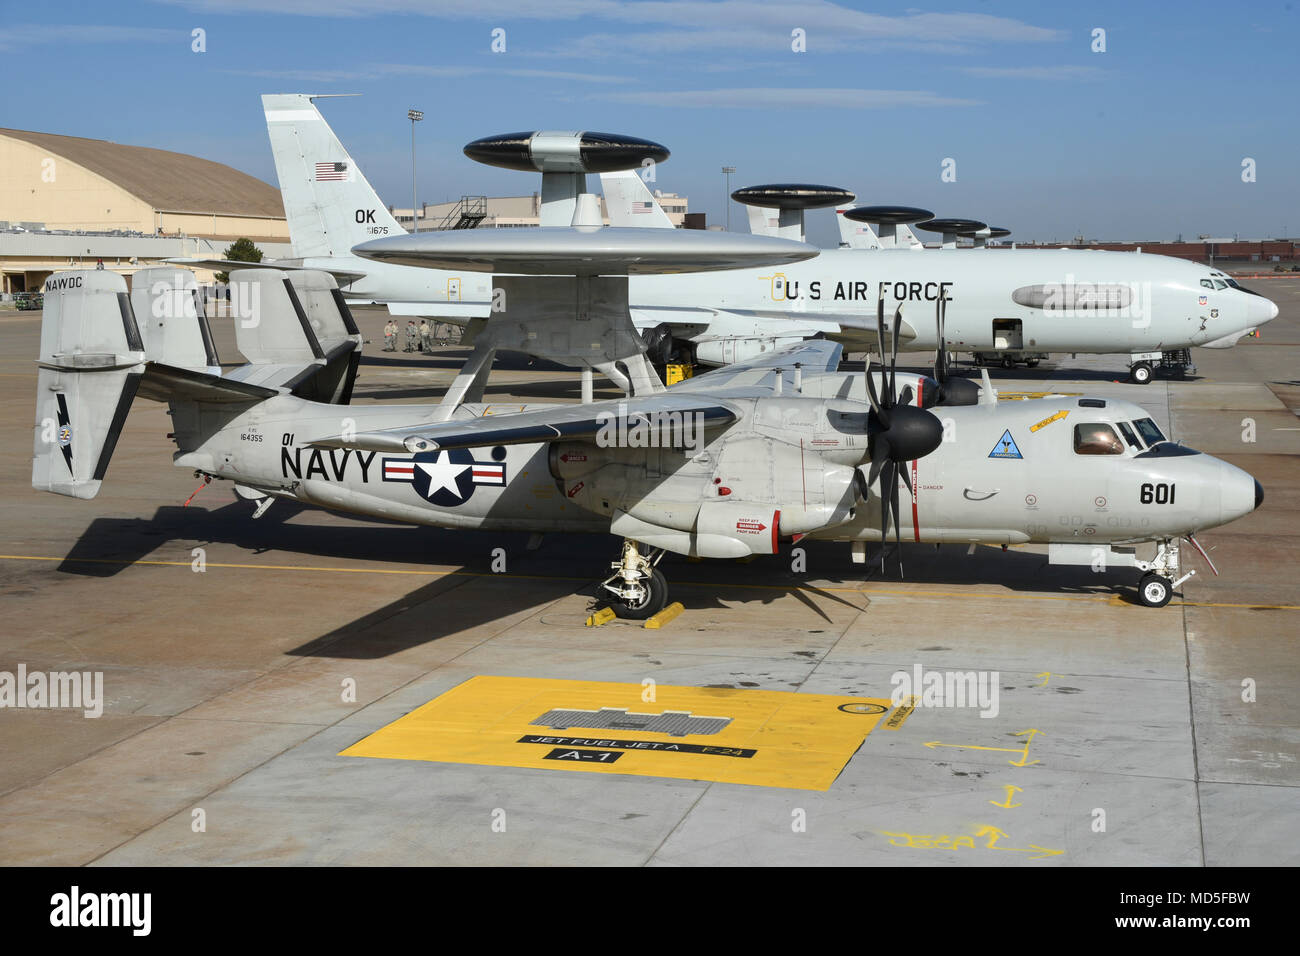 A Navy E 2c Hawkeye Airborne Early Warning Aircraft From Naval Aviation Warfighting Development Center Naval Air Station Fallon Nevada Shown On The Flight Line Next To Air Force E 3 Airborne Warning And